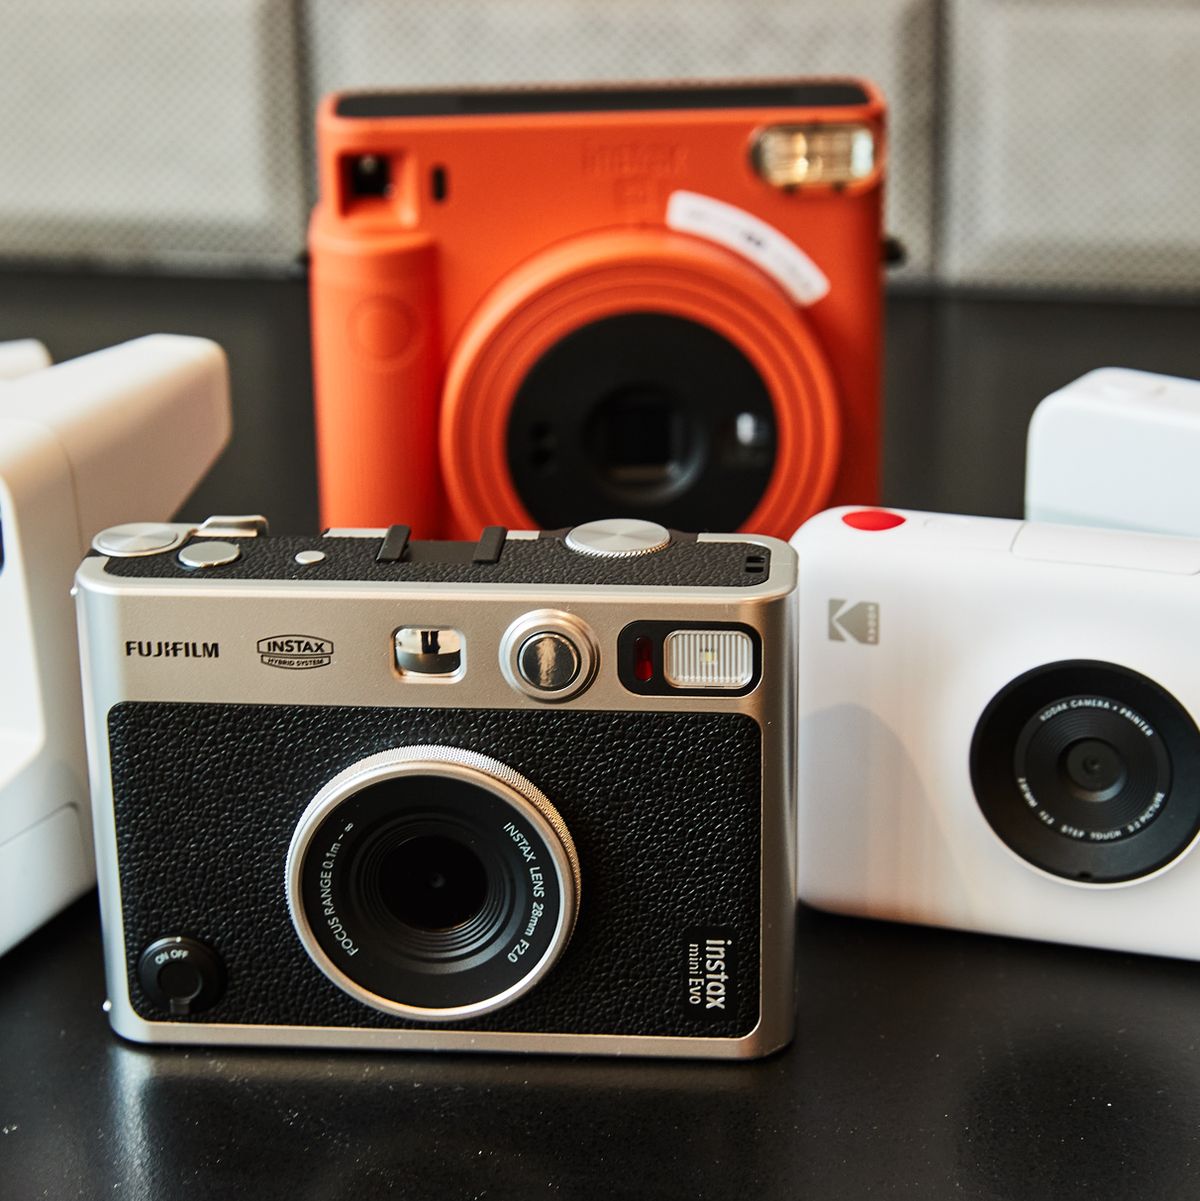 Fujifilm Instax Buying Guide: What You Need to Know About Cameras